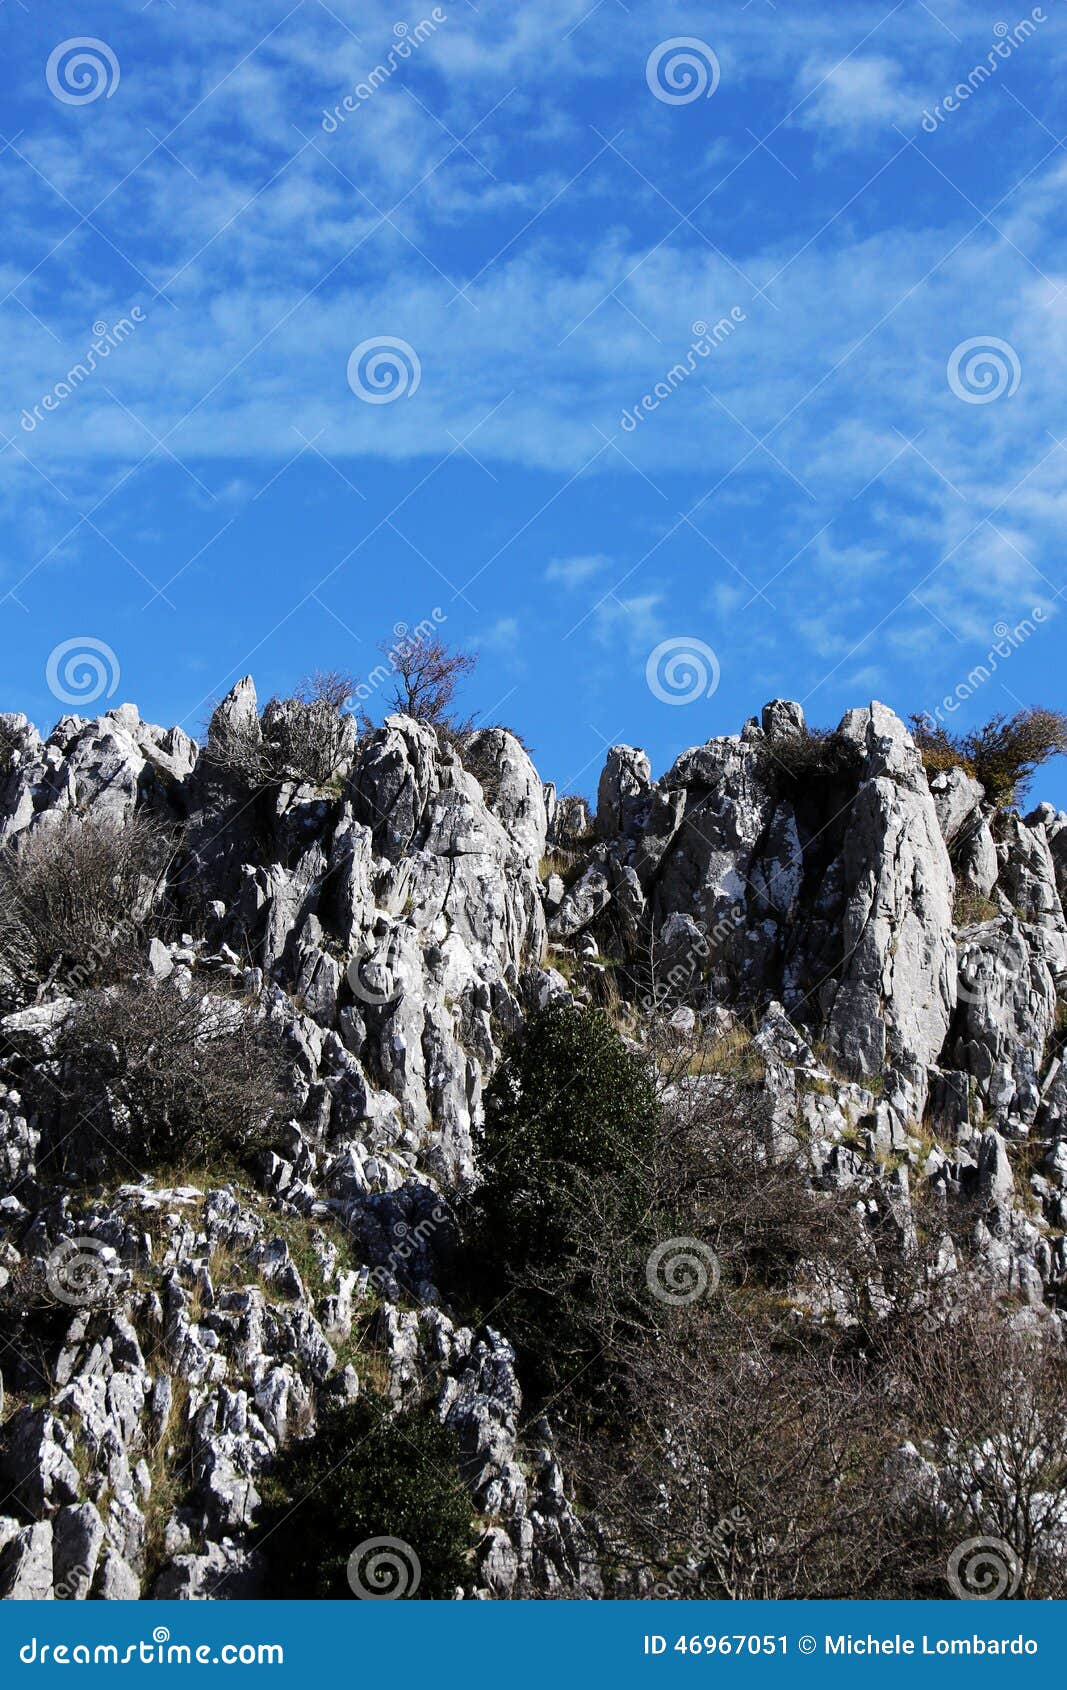 rock outcroppings in autumn, sunny day